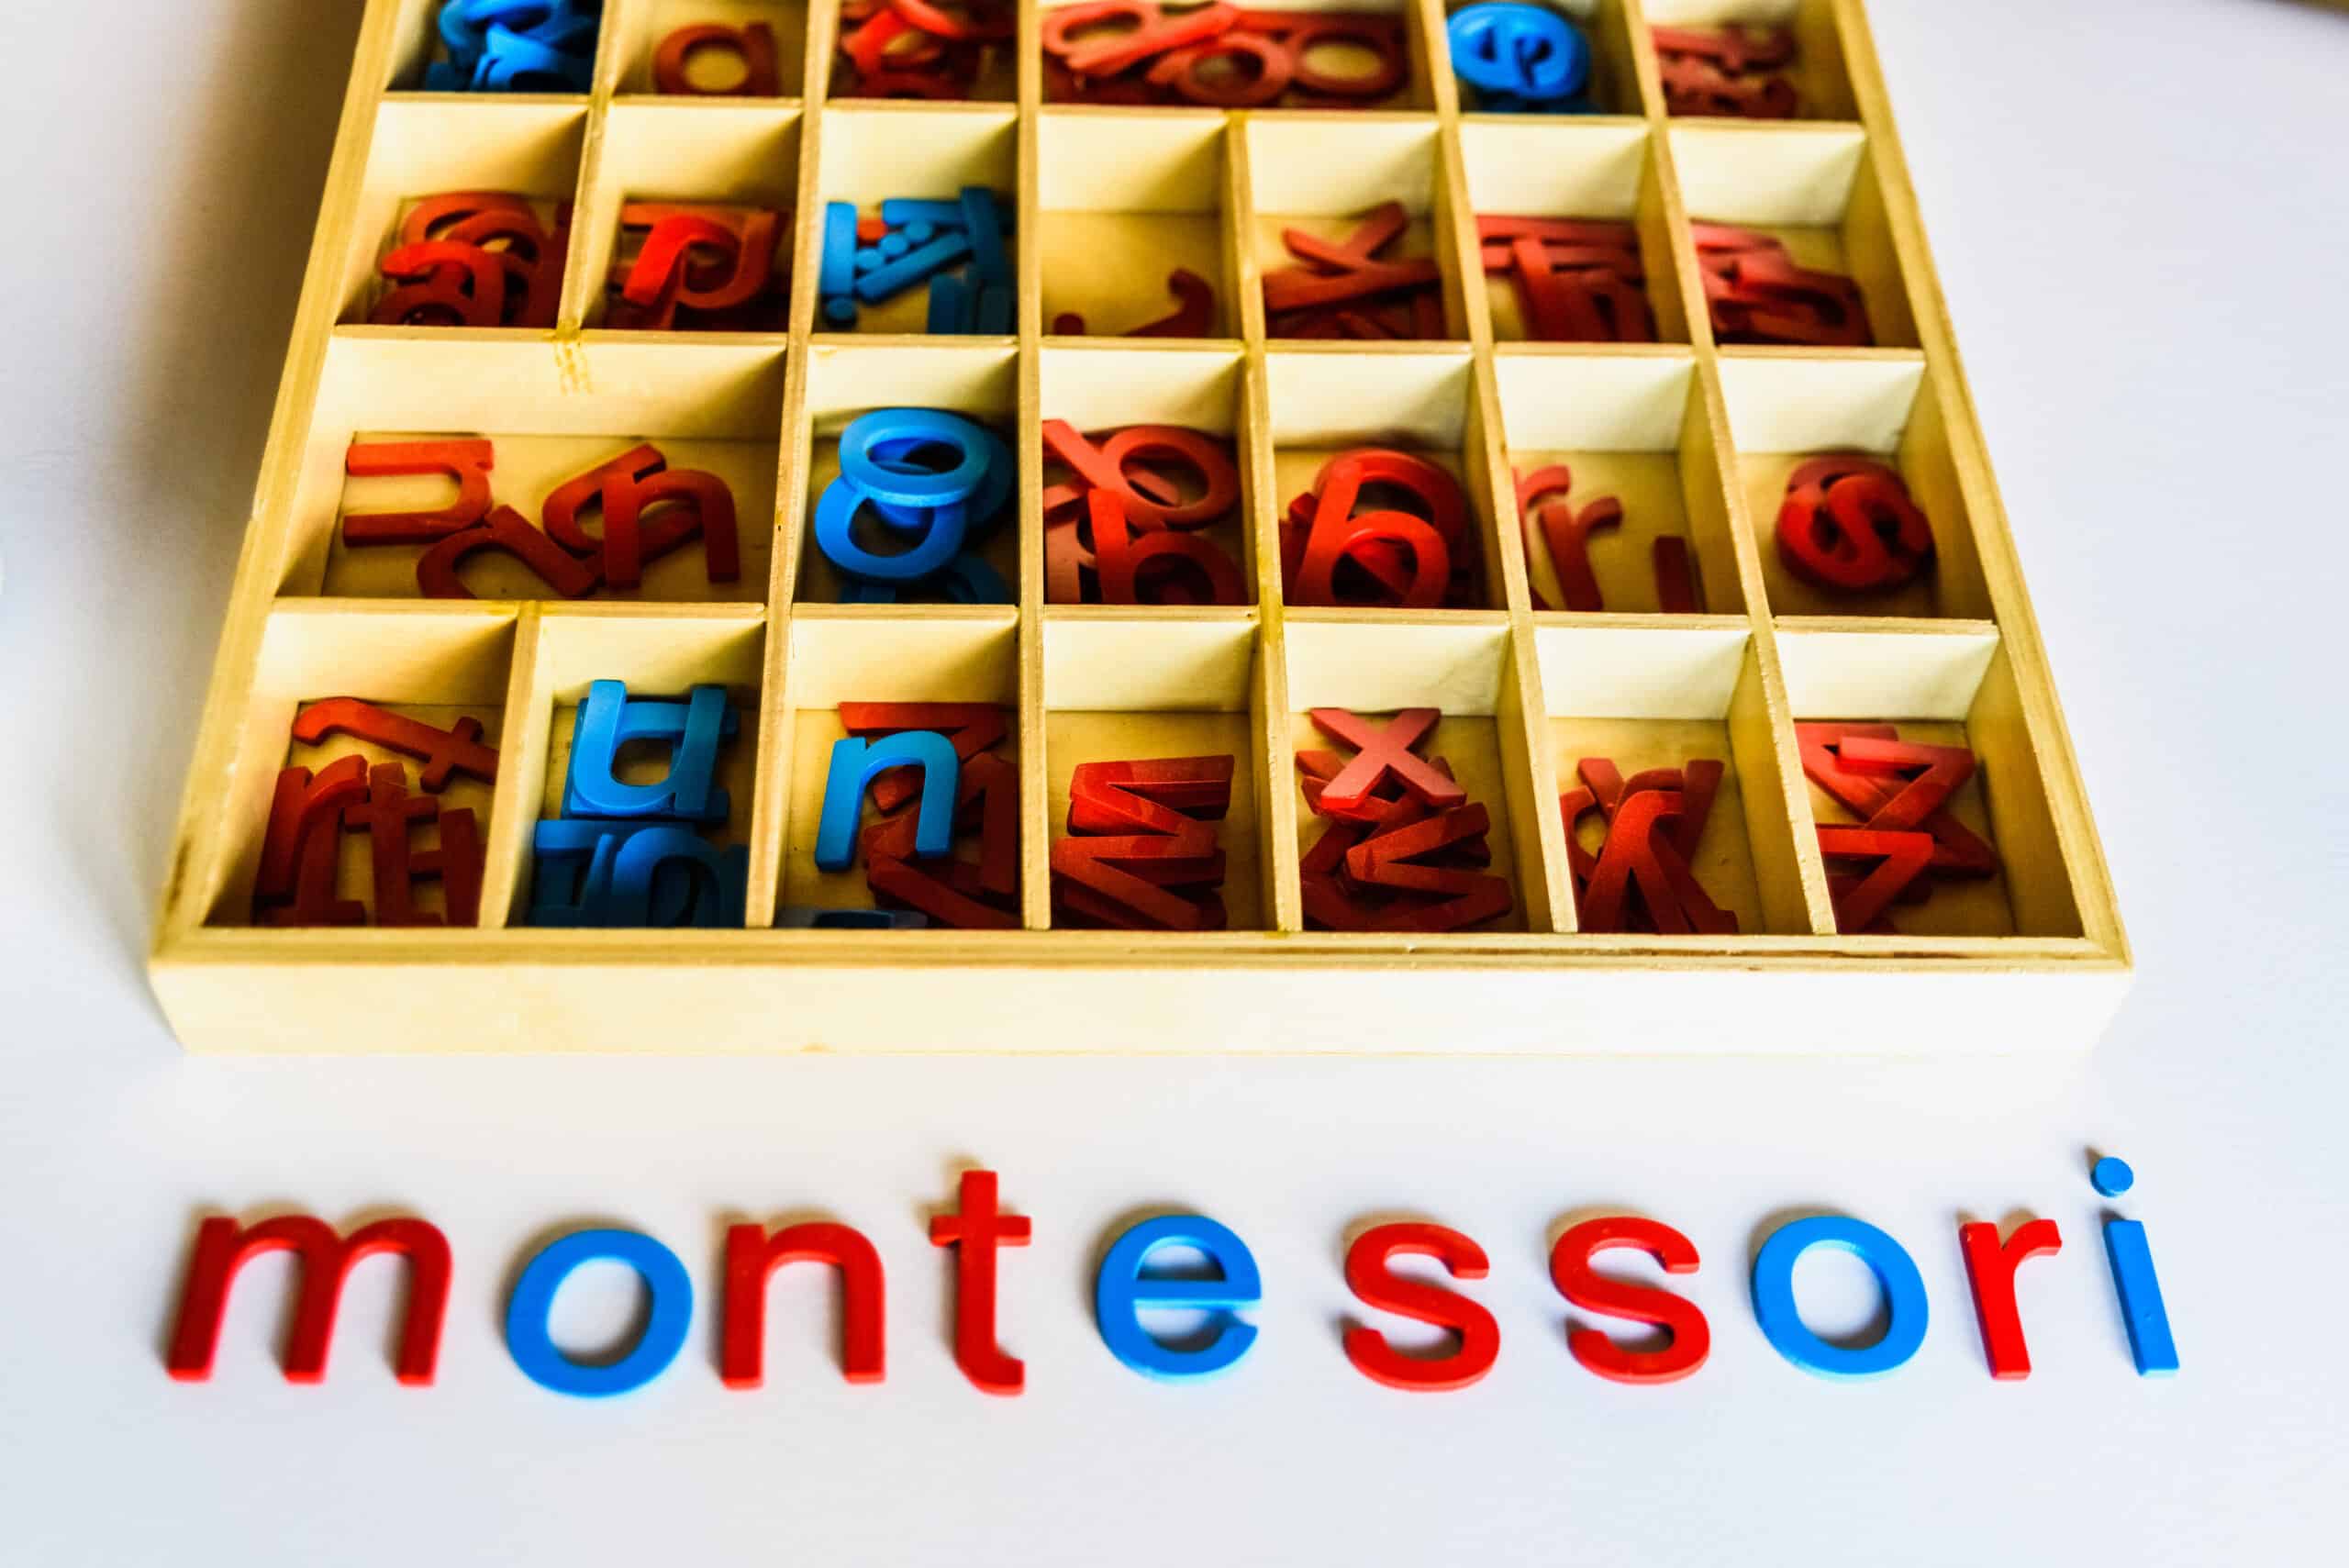 A natural wooden box center frame top 2/3rd of frame. Twenty-one rectangular partitioned spaces are fully visible, while 7 more are partially visible at the very top of the frame. Each rectangular space holds a letter that is either red or blue. in the lower 1/3 of the frame the word Montessori is visible. The vowels are blue while the consonants are red. All of the letters are lowercase. The layout of the letters is not precise.